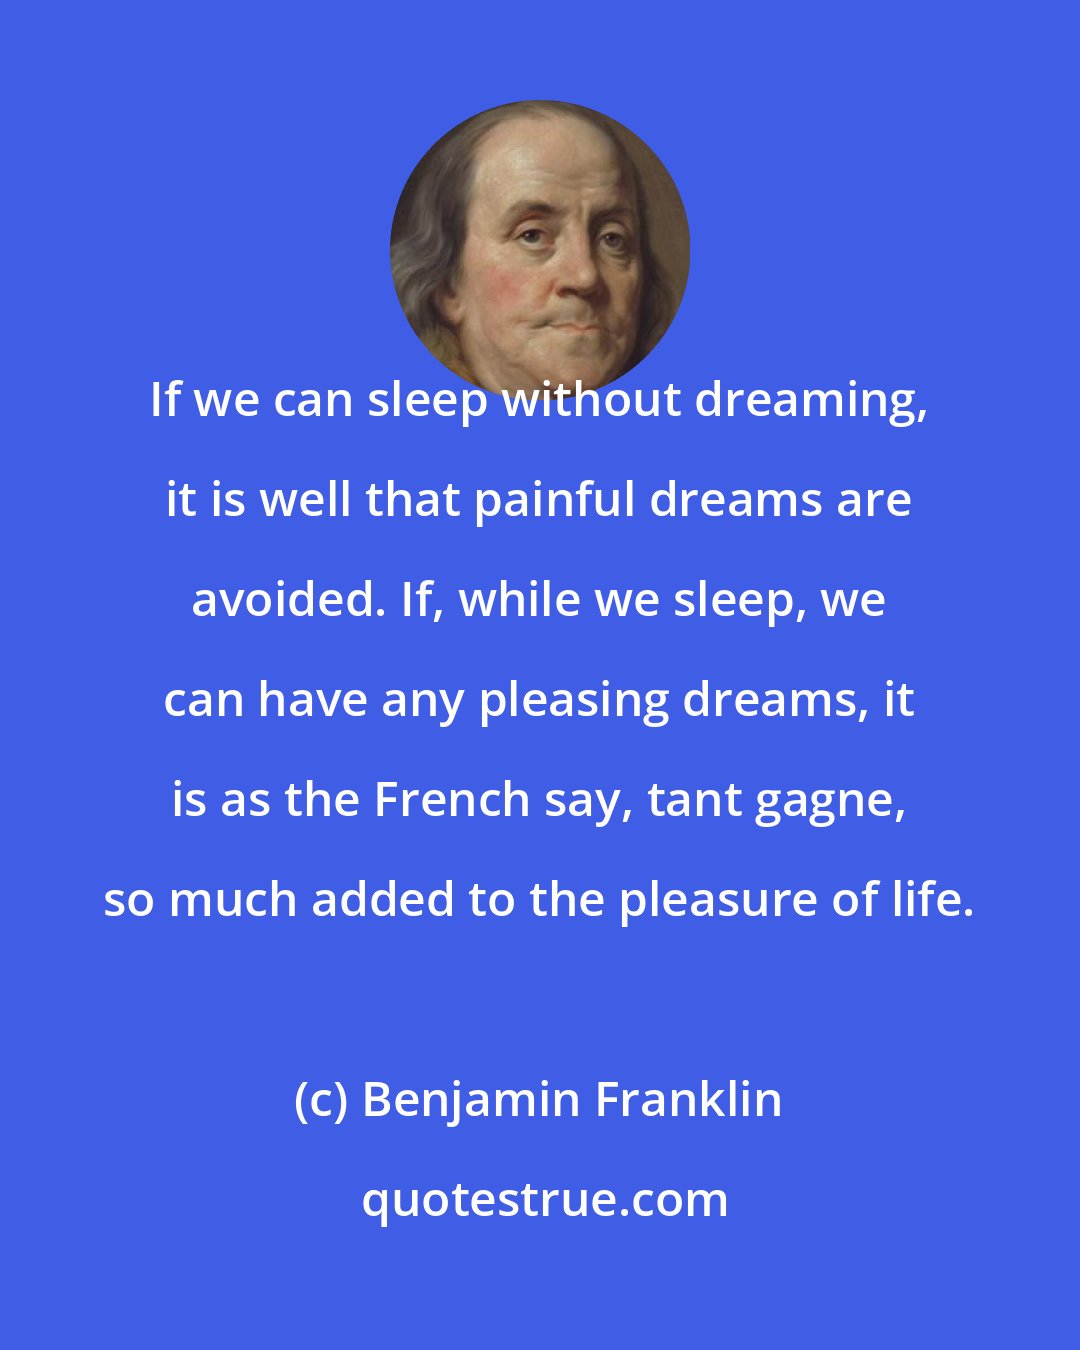 Benjamin Franklin: If we can sleep without dreaming, it is well that painful dreams are avoided. If, while we sleep, we can have any pleasing dreams, it is as the French say, tant gagne, so much added to the pleasure of life.